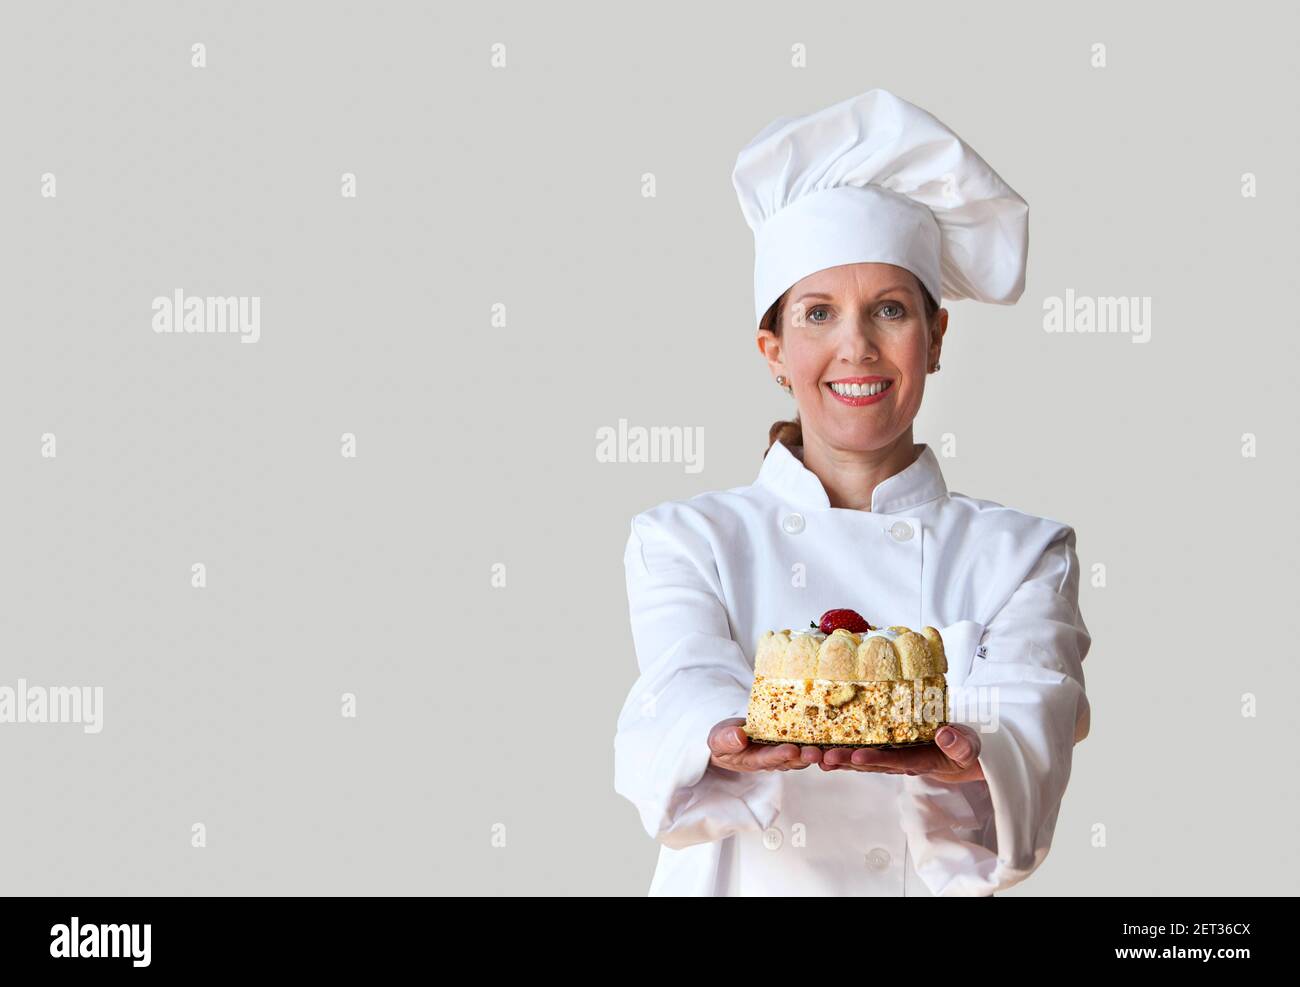 Chef holding a cake wearing a clean white chef uniform. Stock Photo